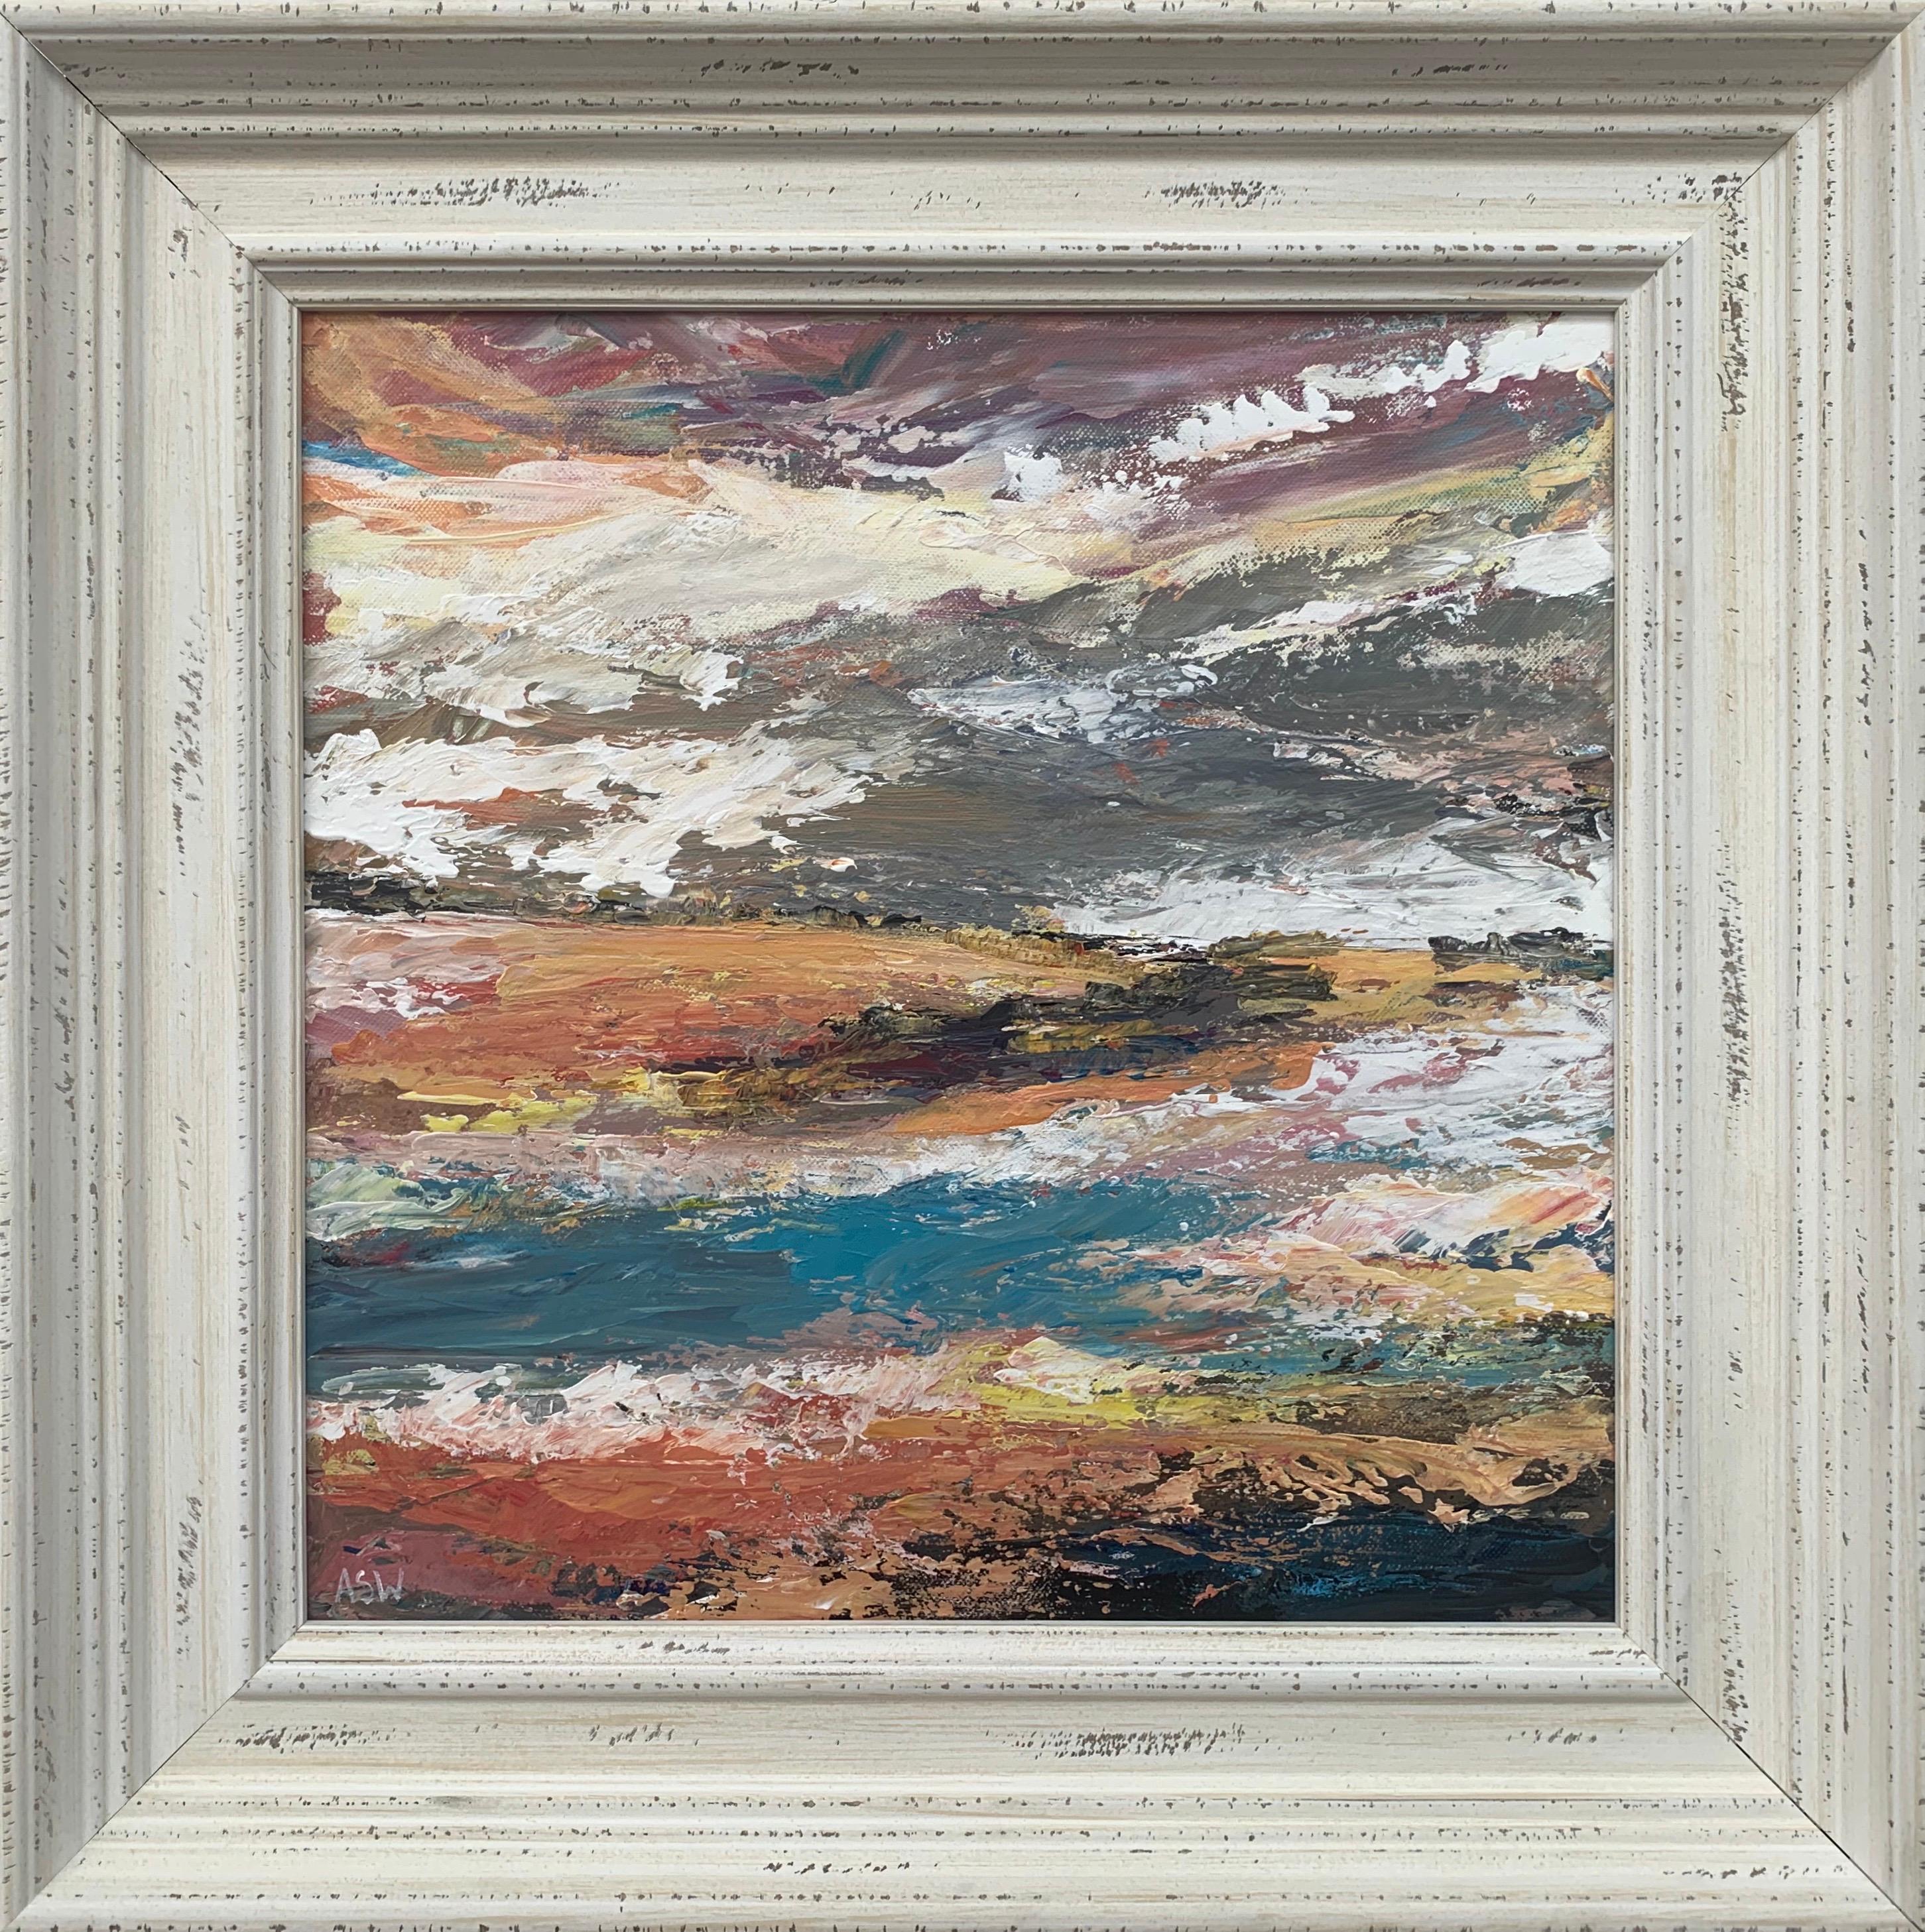 Colourful Expressive Abstract River Landscape Art by Contemporary British Artist